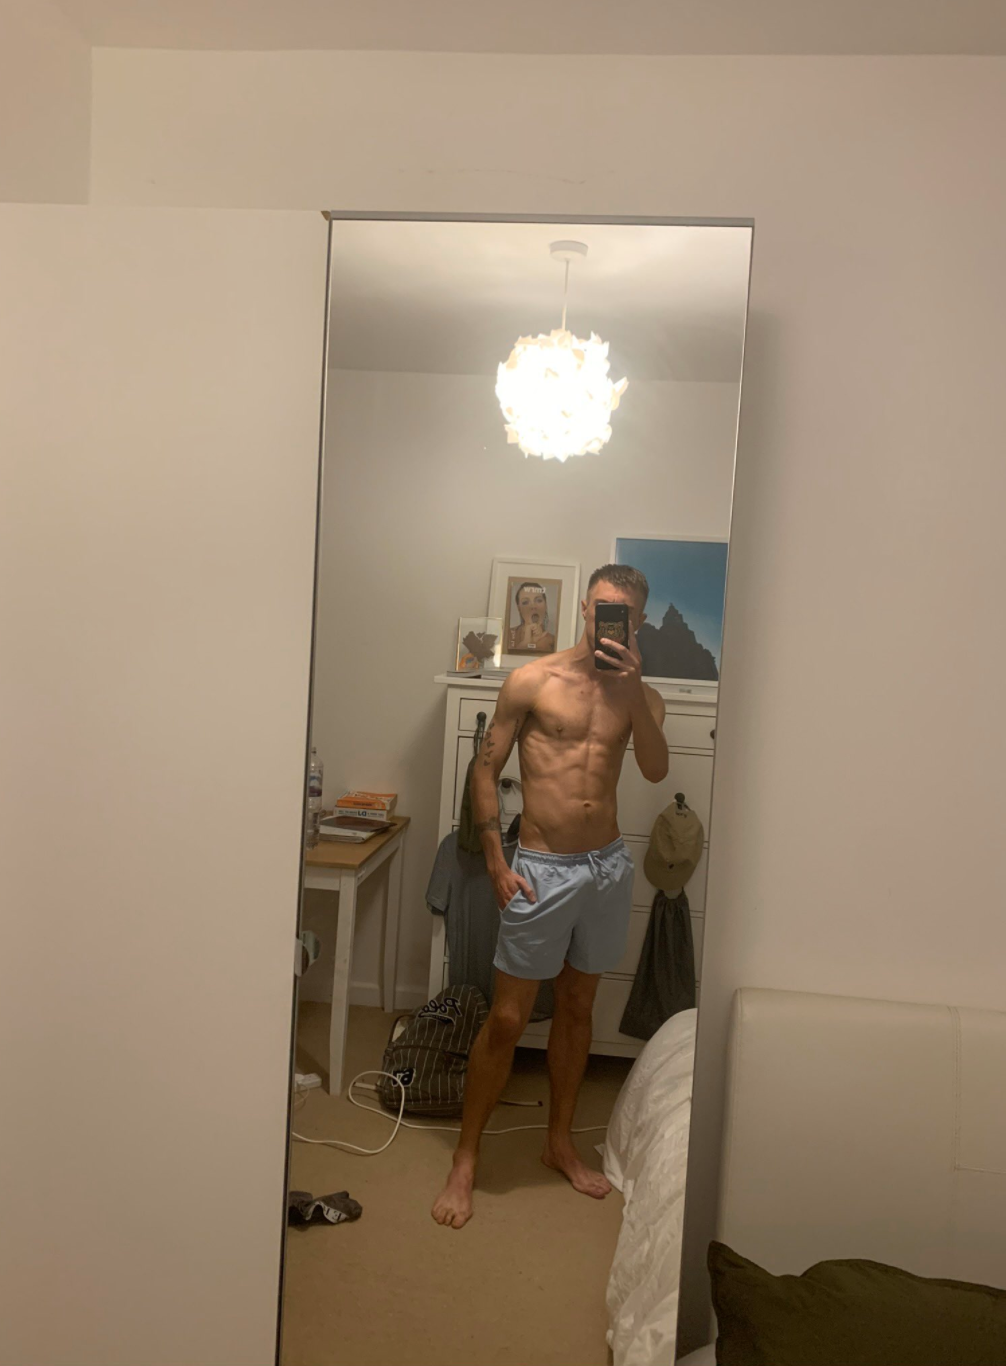 Show up background on will onlyfans check a Will having